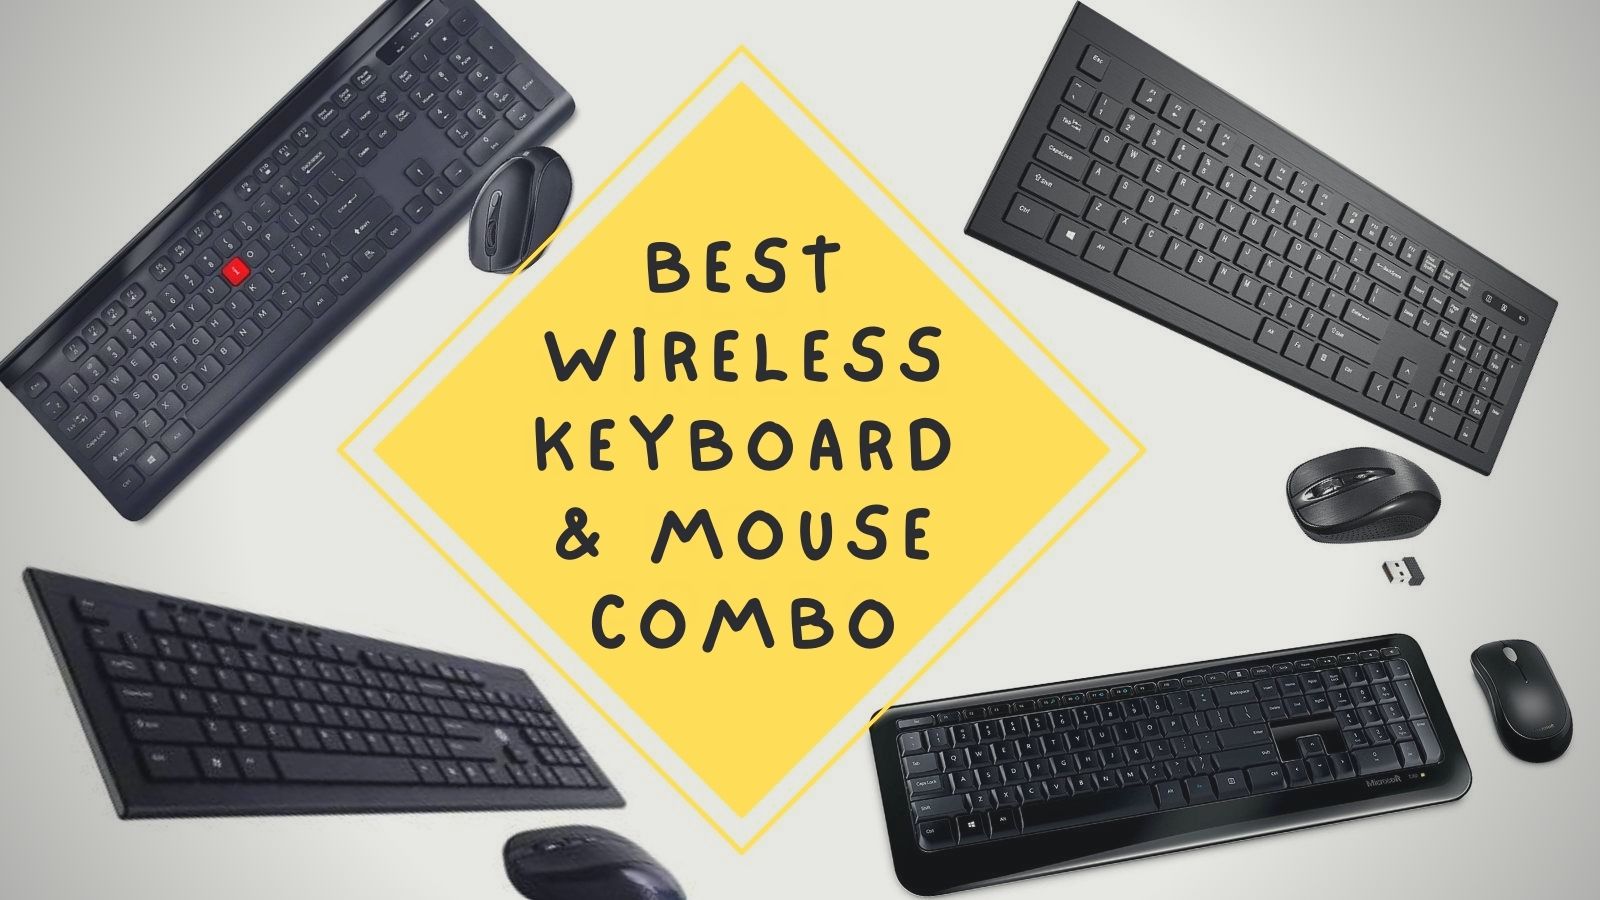 Best Wireless Keyboard and Mouse Combo in India